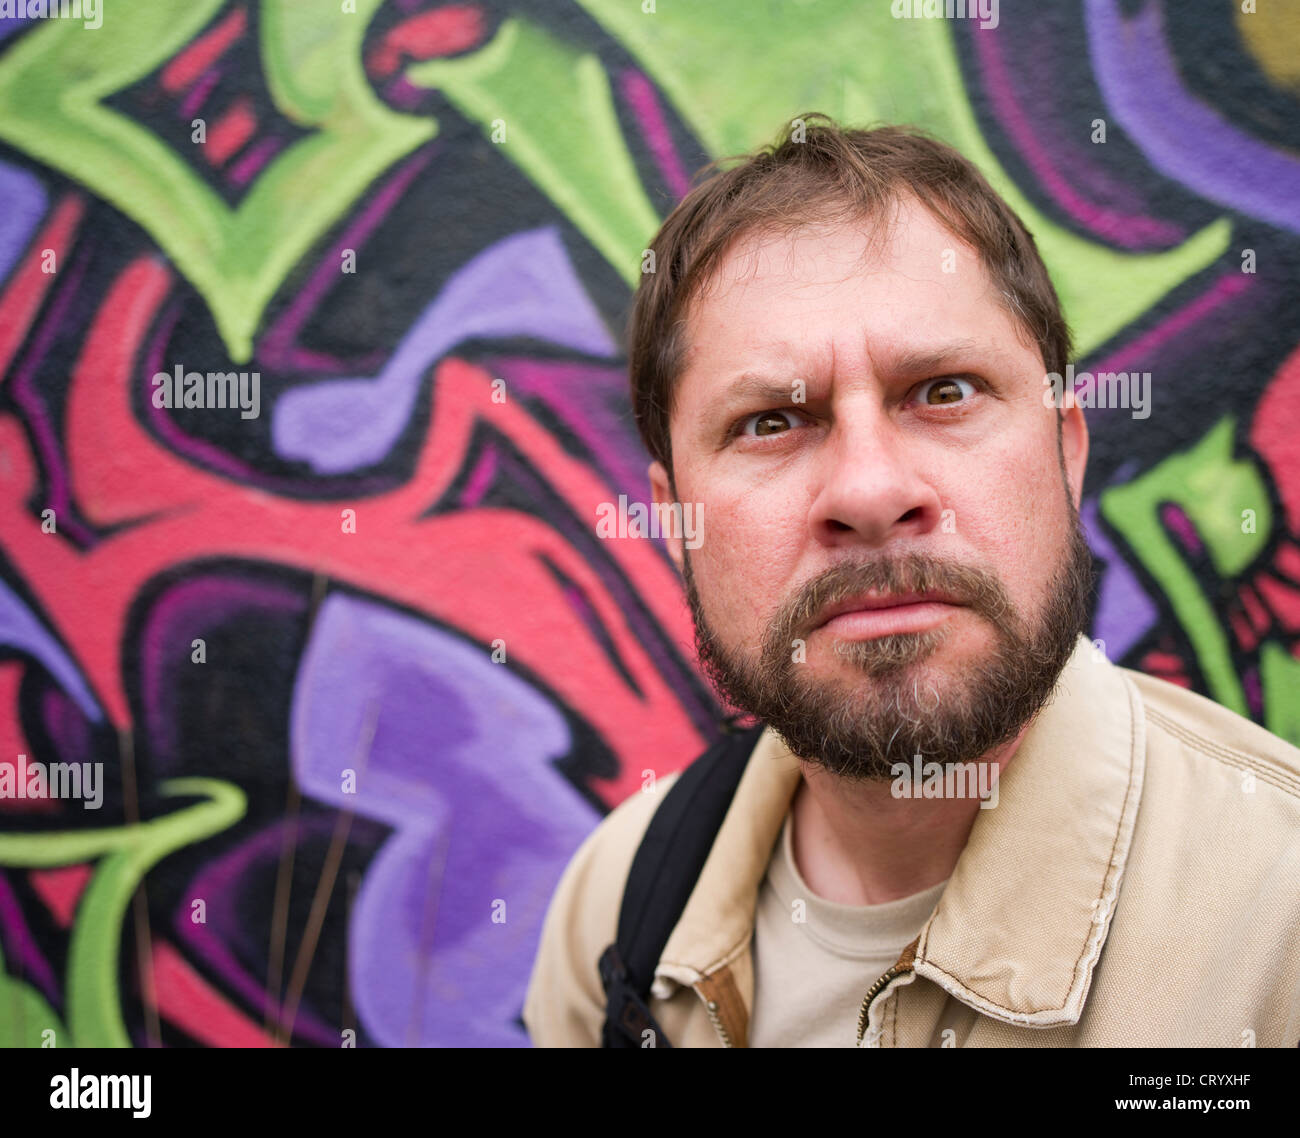 Man with stern face looks towards camera. Stock Photo